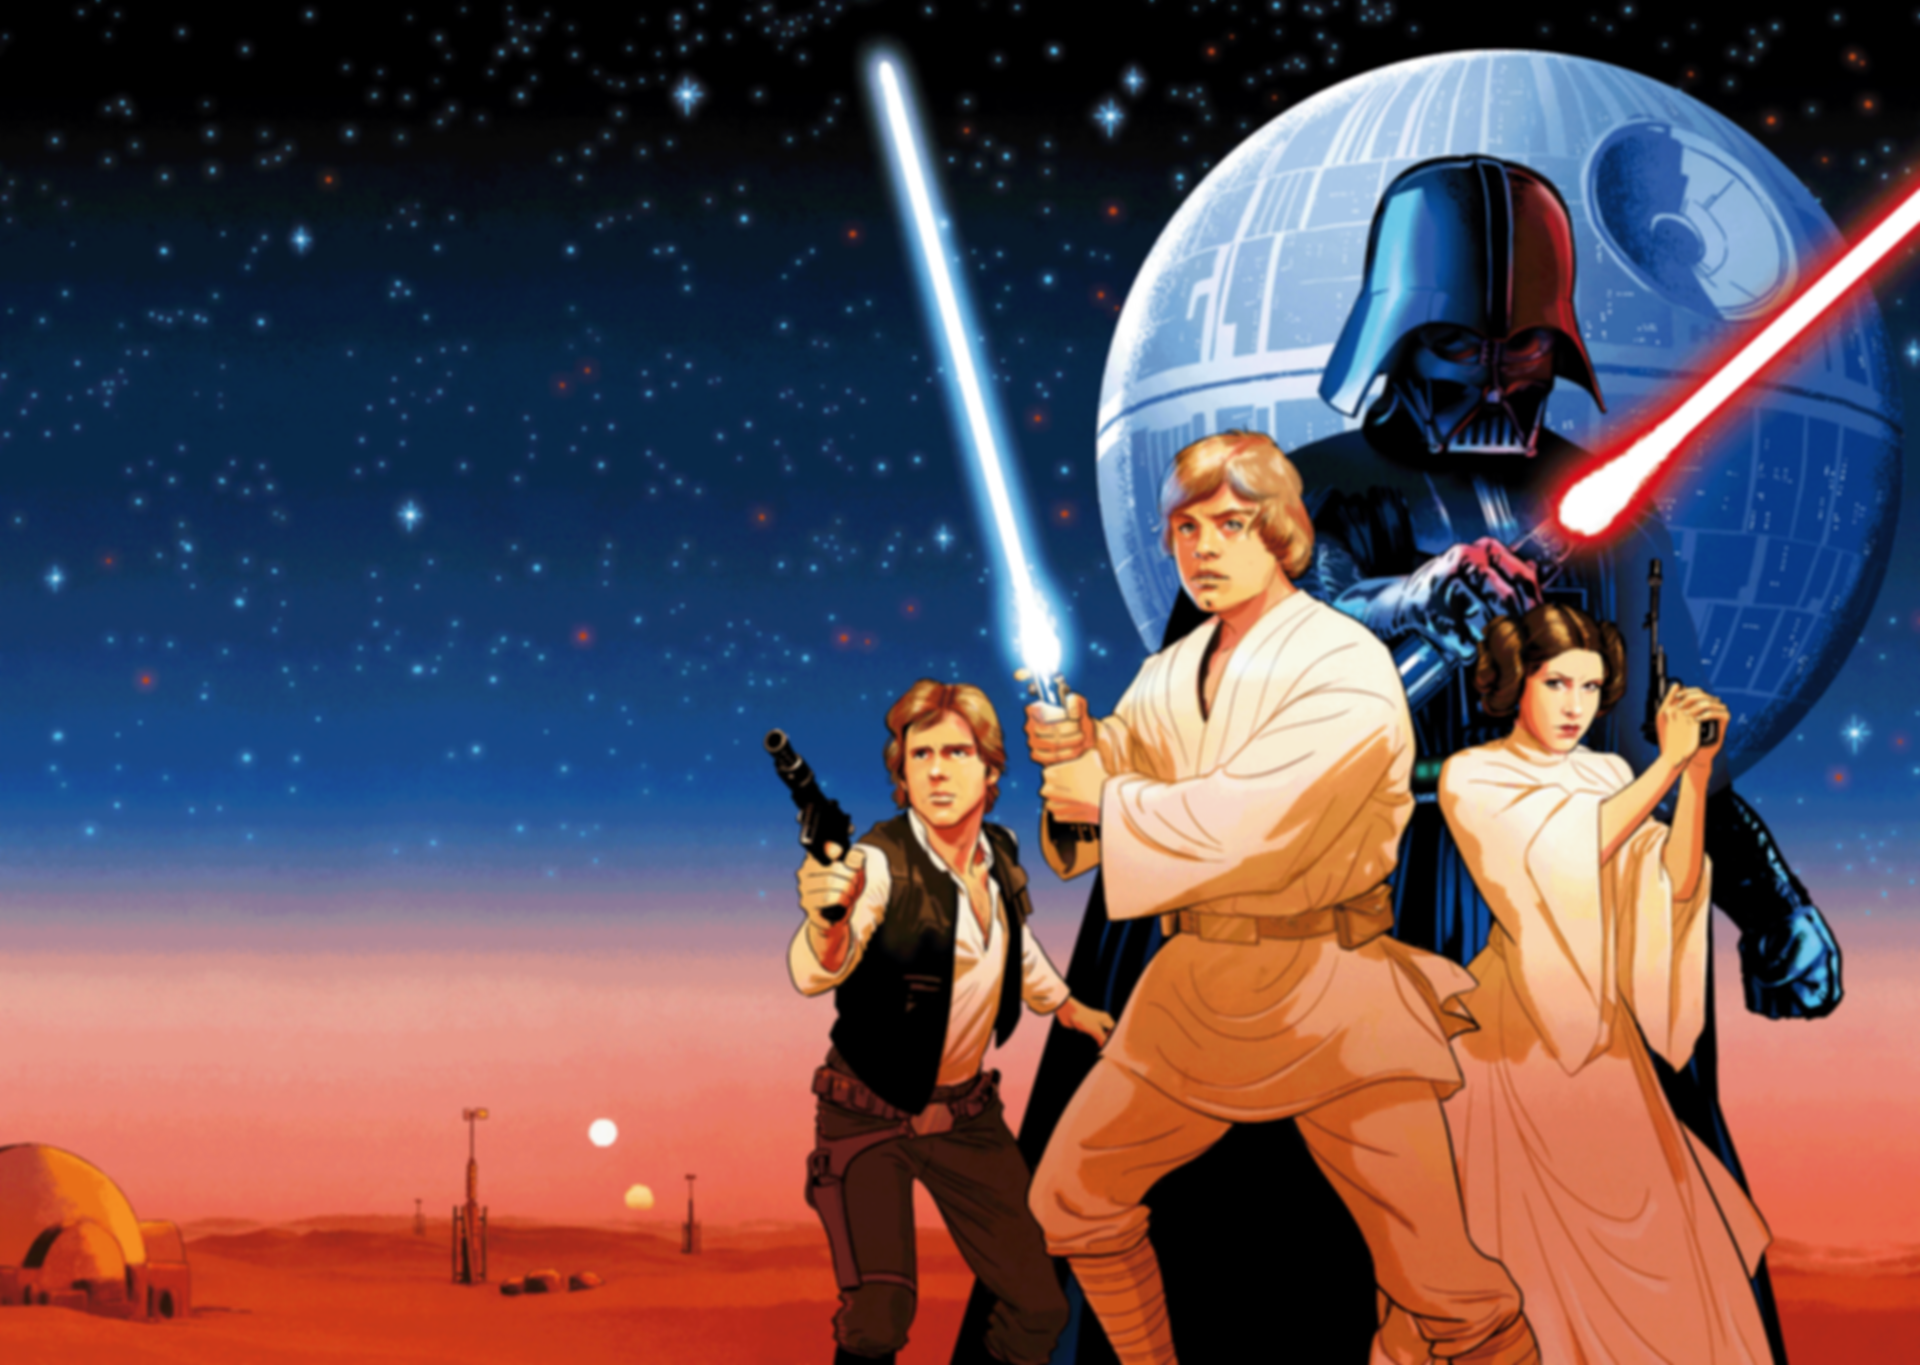 New Star Wars Trading Card Game - Fantasy Flight Games Announces Star Wars: Unlimited